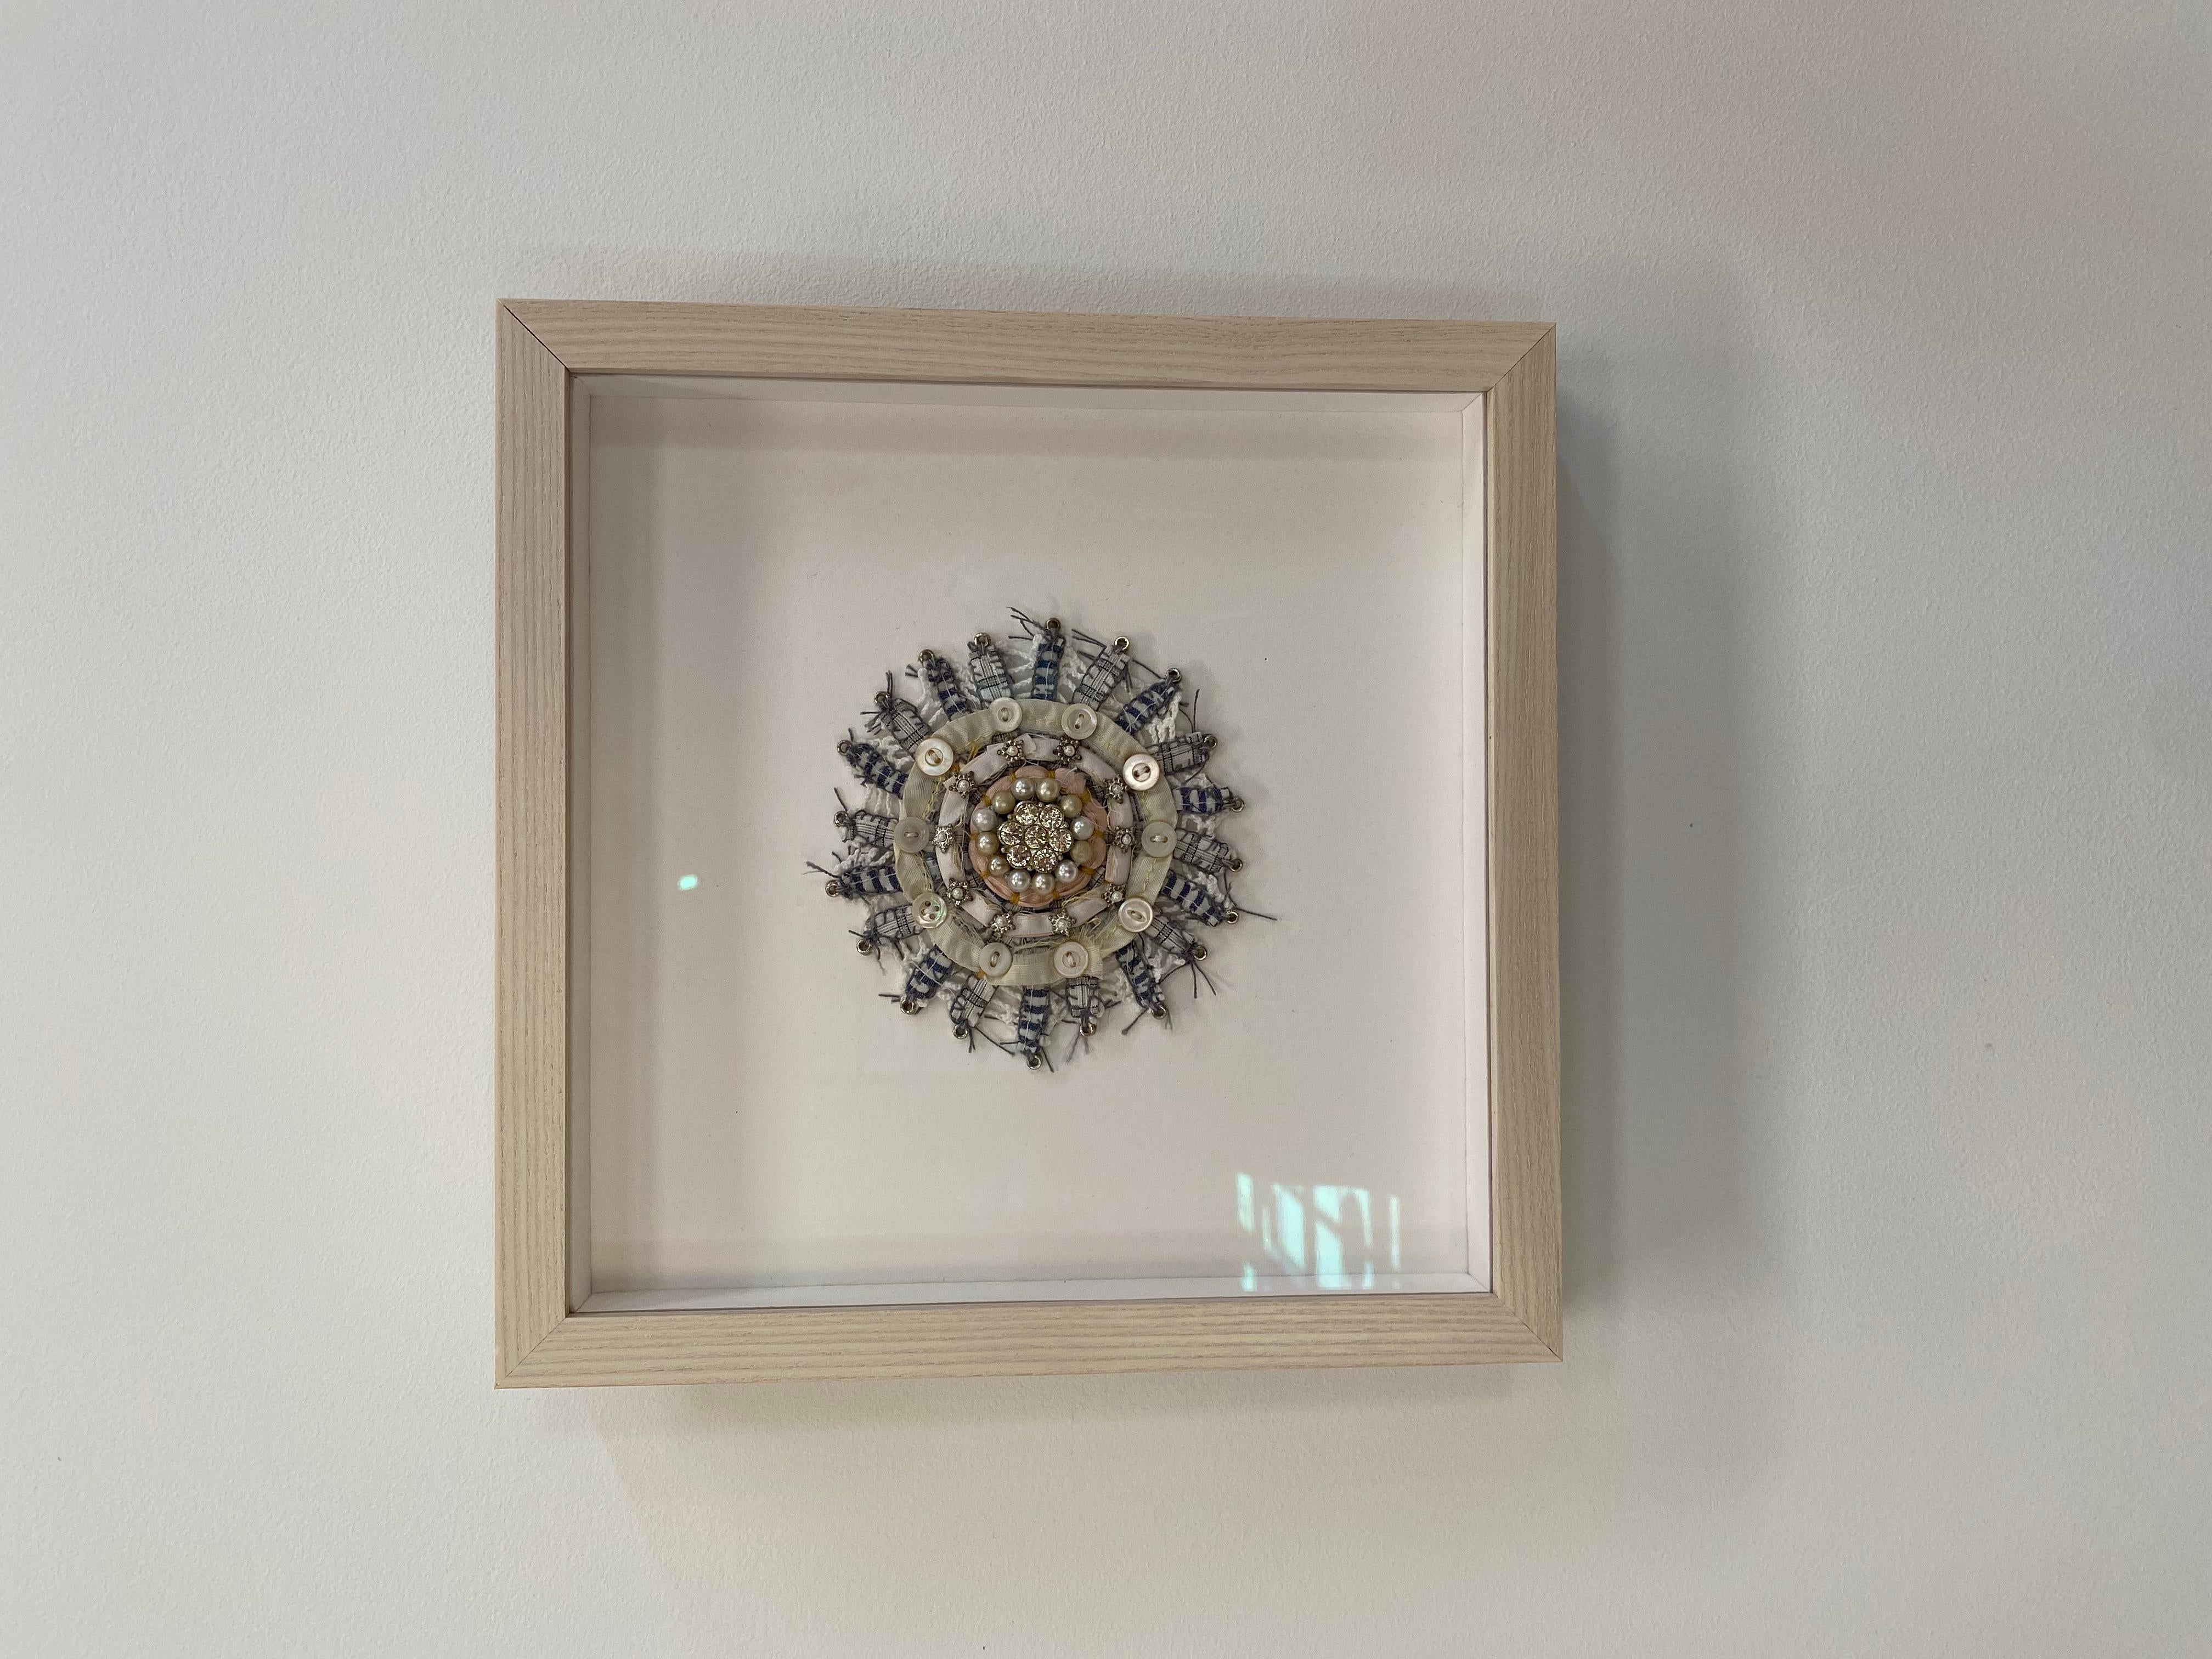 This mixed media mandala by Donna Sharrett contains guitar string ball-ends, clothing, needlework, jewelry, and thread. Glittering gold faceted beads at the center are outlined with a circle of pearls in ivory and gold surrounded by pale peach